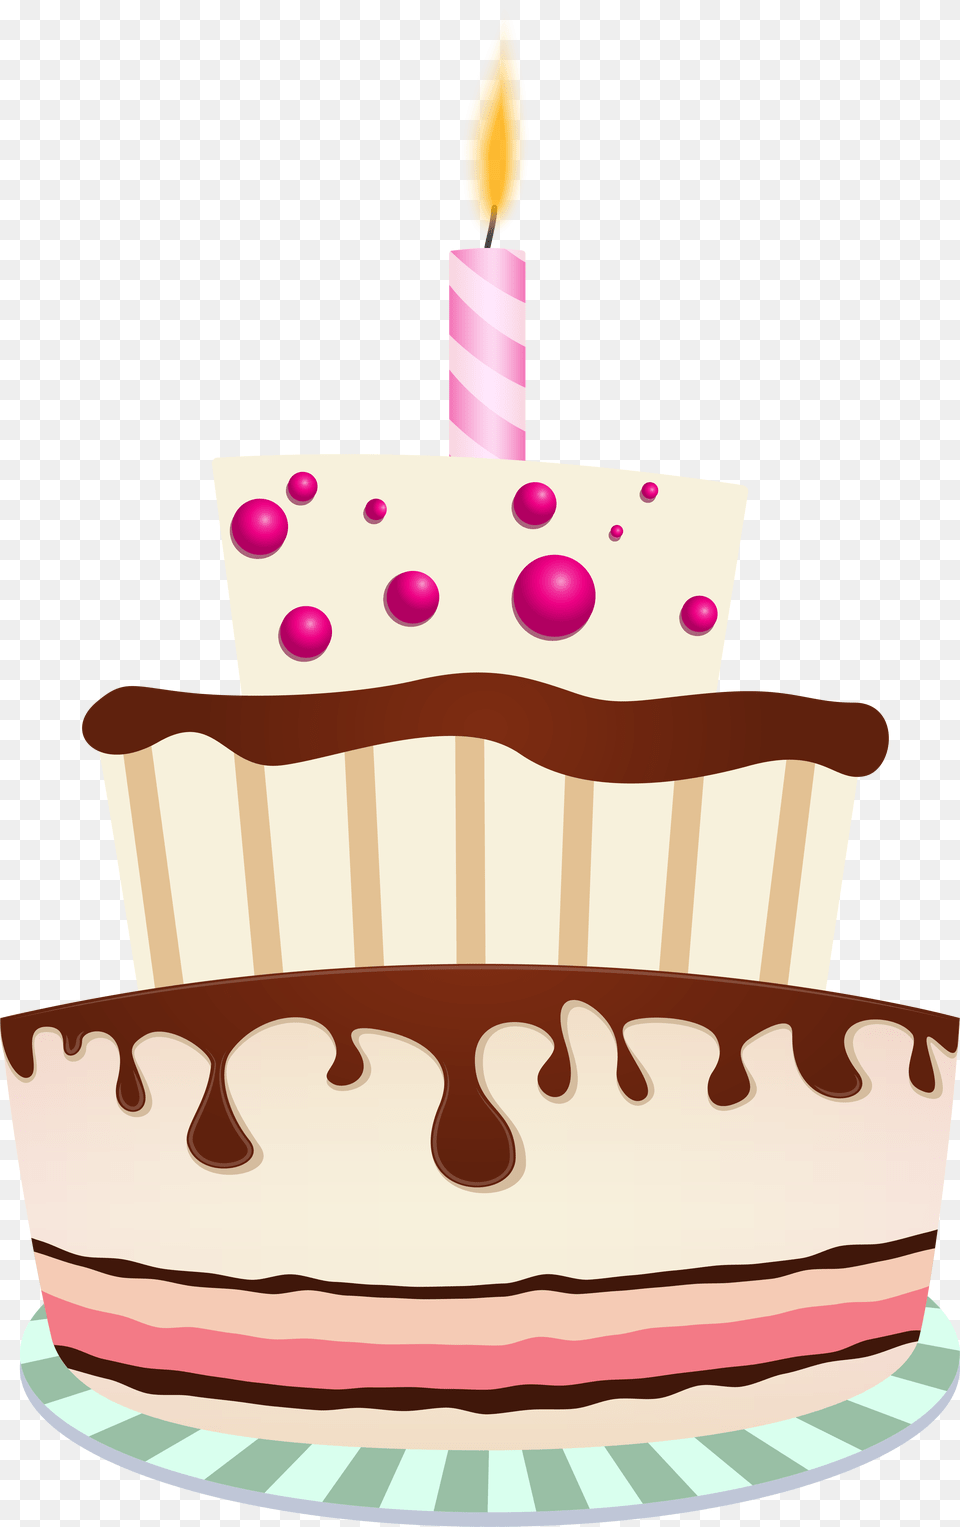 Graphic Royalty Free Stock Birthday Cake With Lots Happy Birthday On Your Special Day, Birthday Cake, Cream, Dessert, Food Png Image